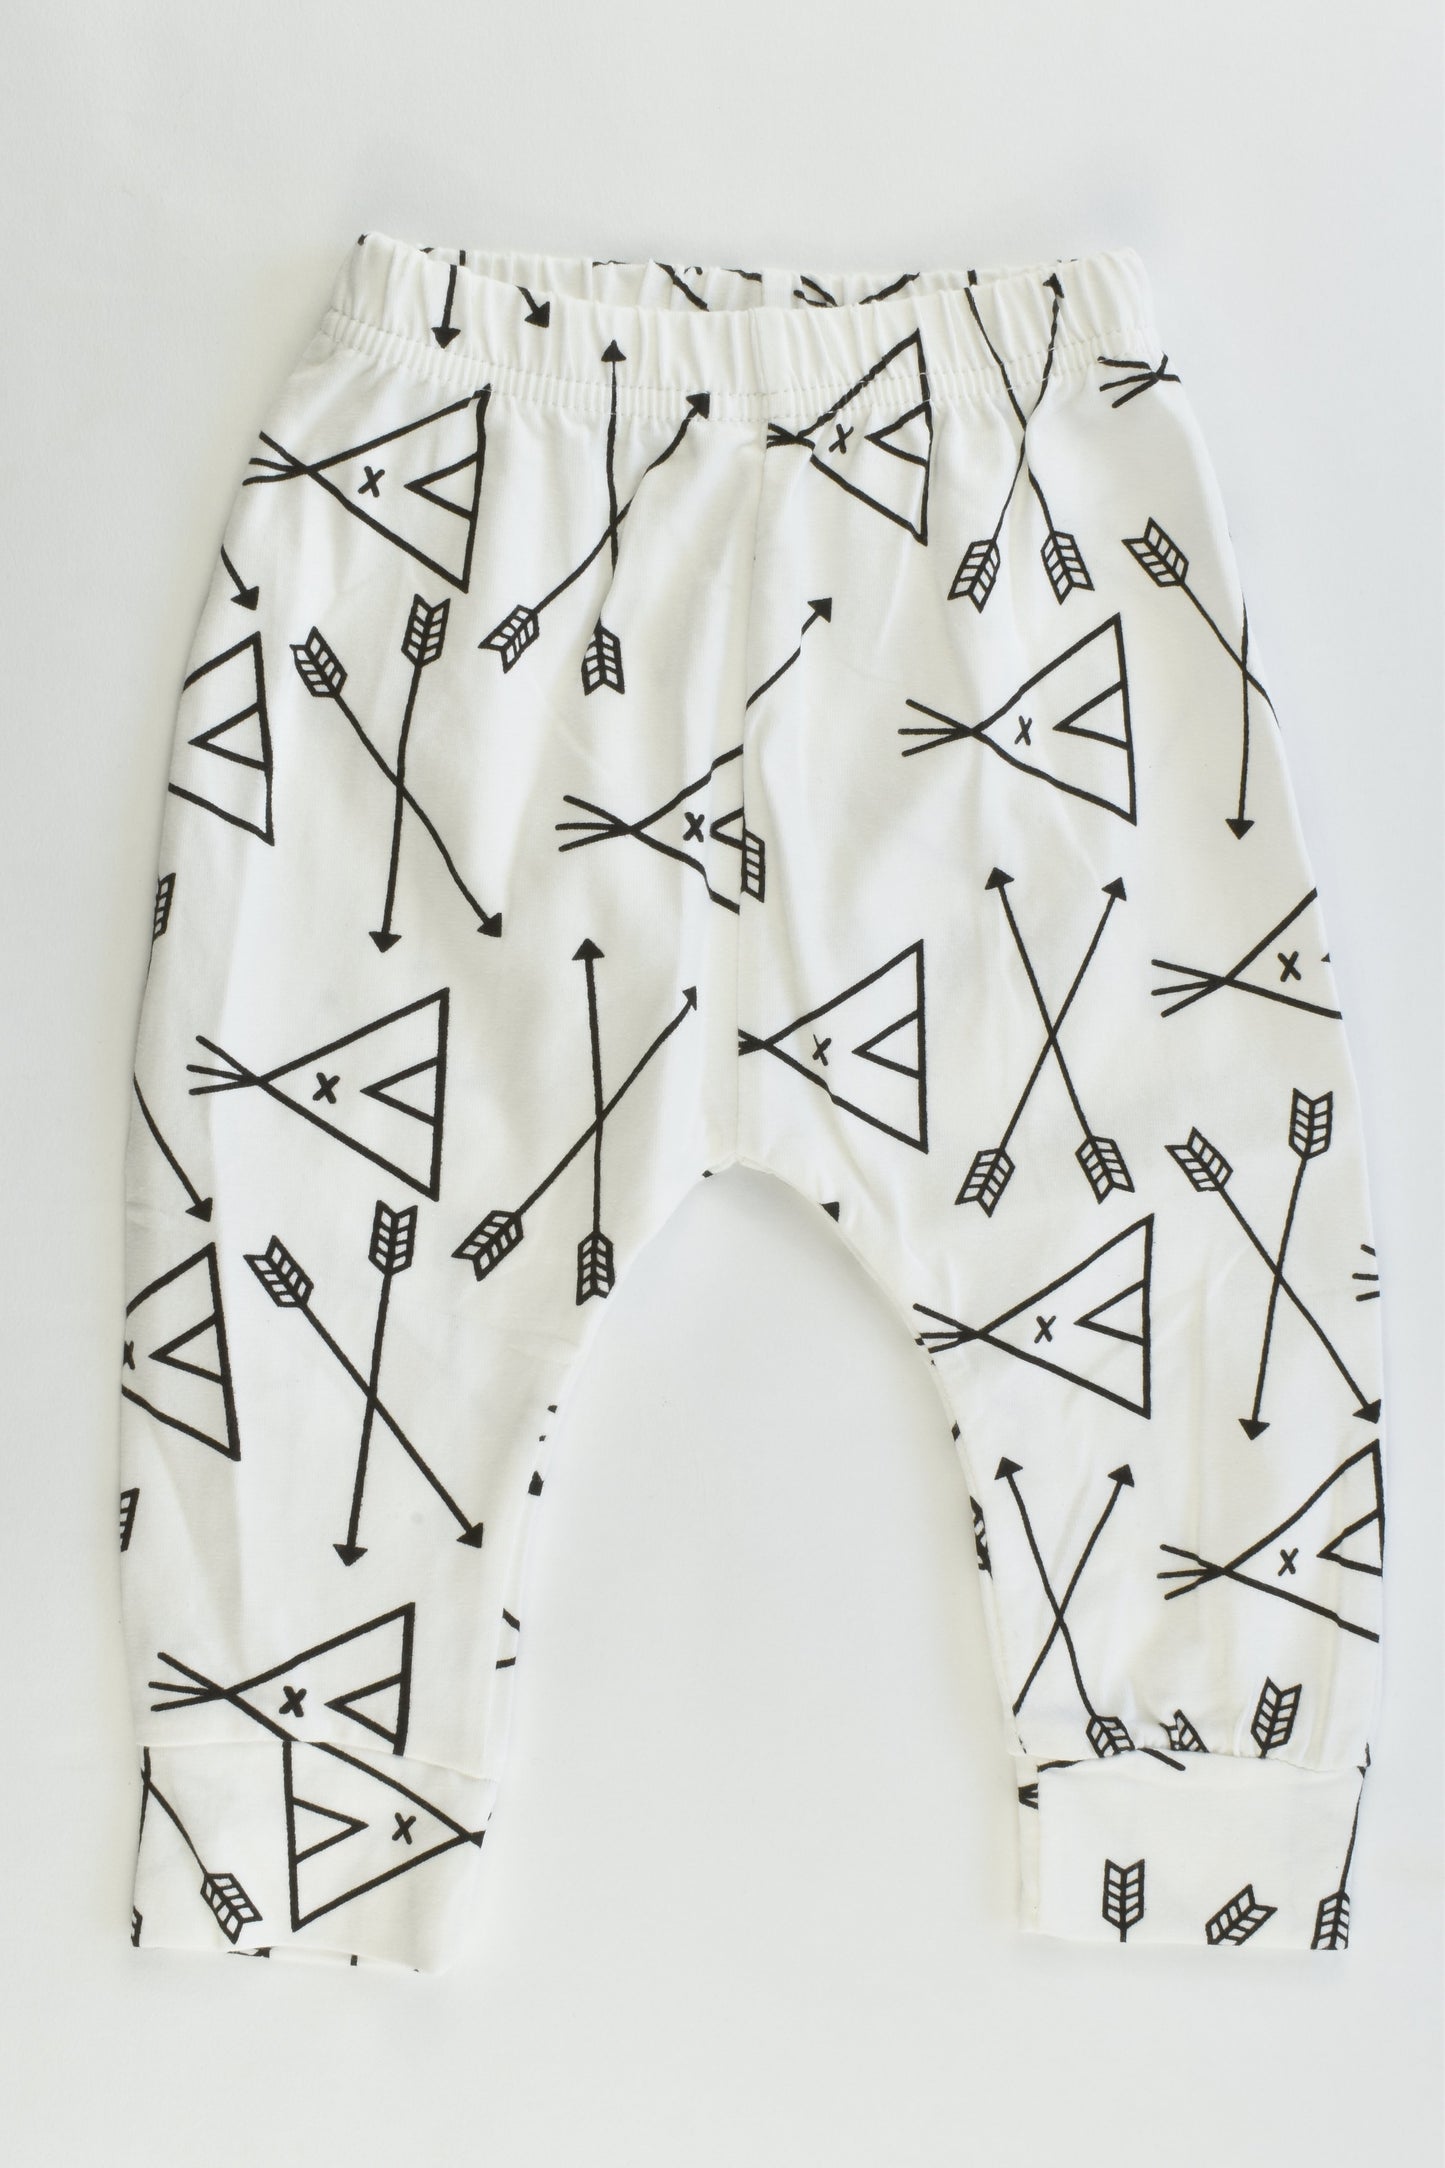 NEW Brand Unknown Size 70 cm (00-0) Teepee Baggy Pants